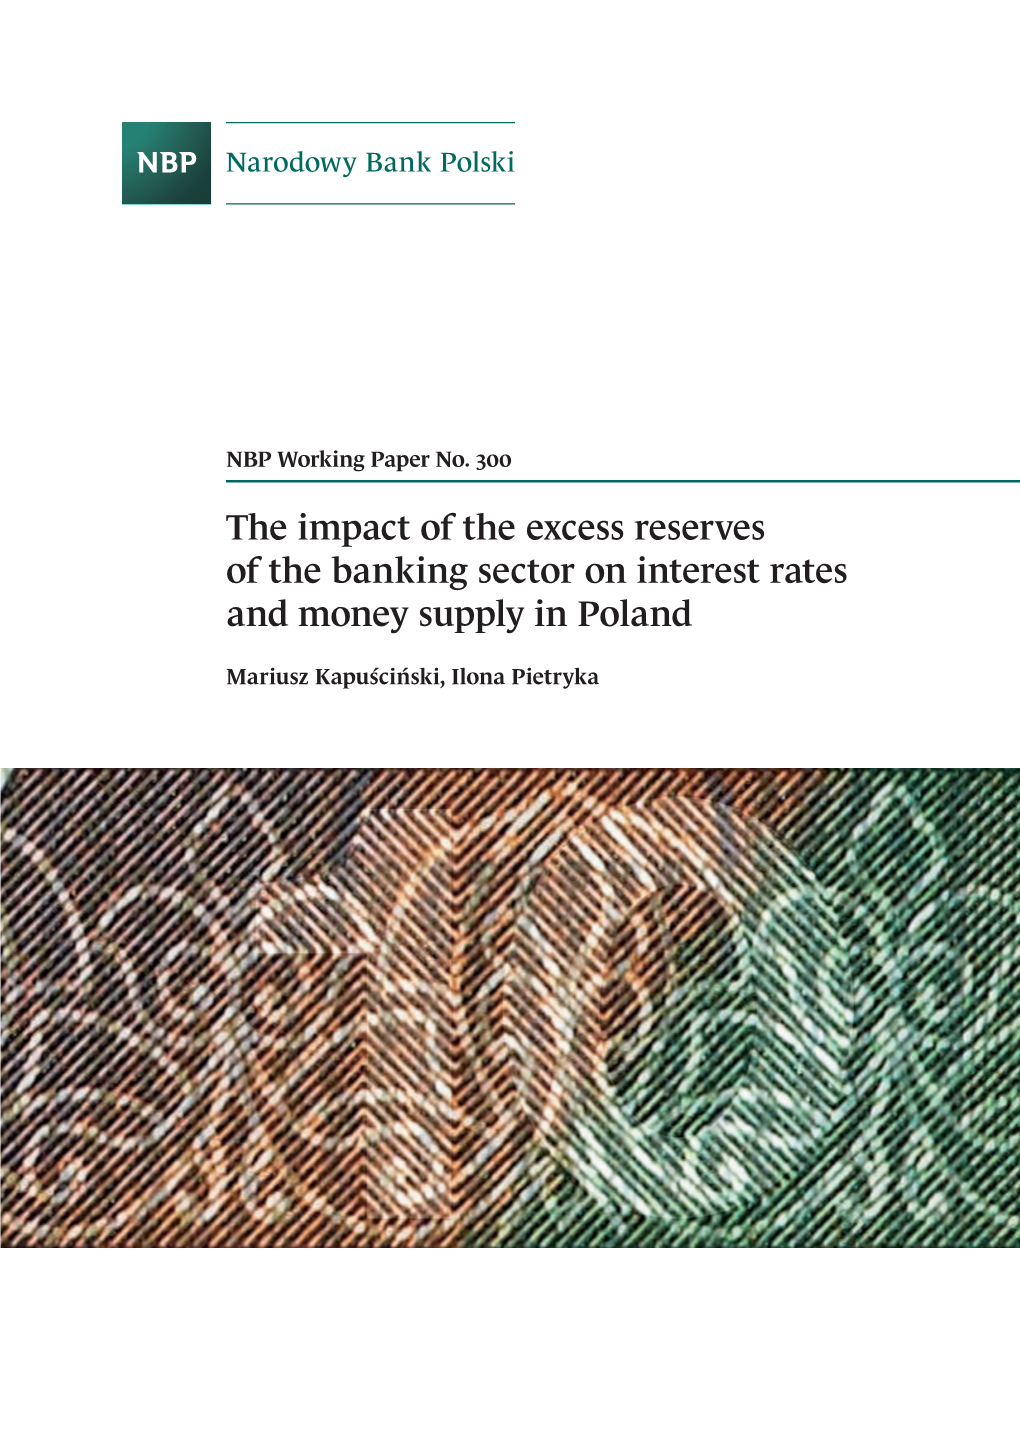 The Impact of the Excess Reserves of the Banking Sector on Interest Rates and Money Supply in Poland